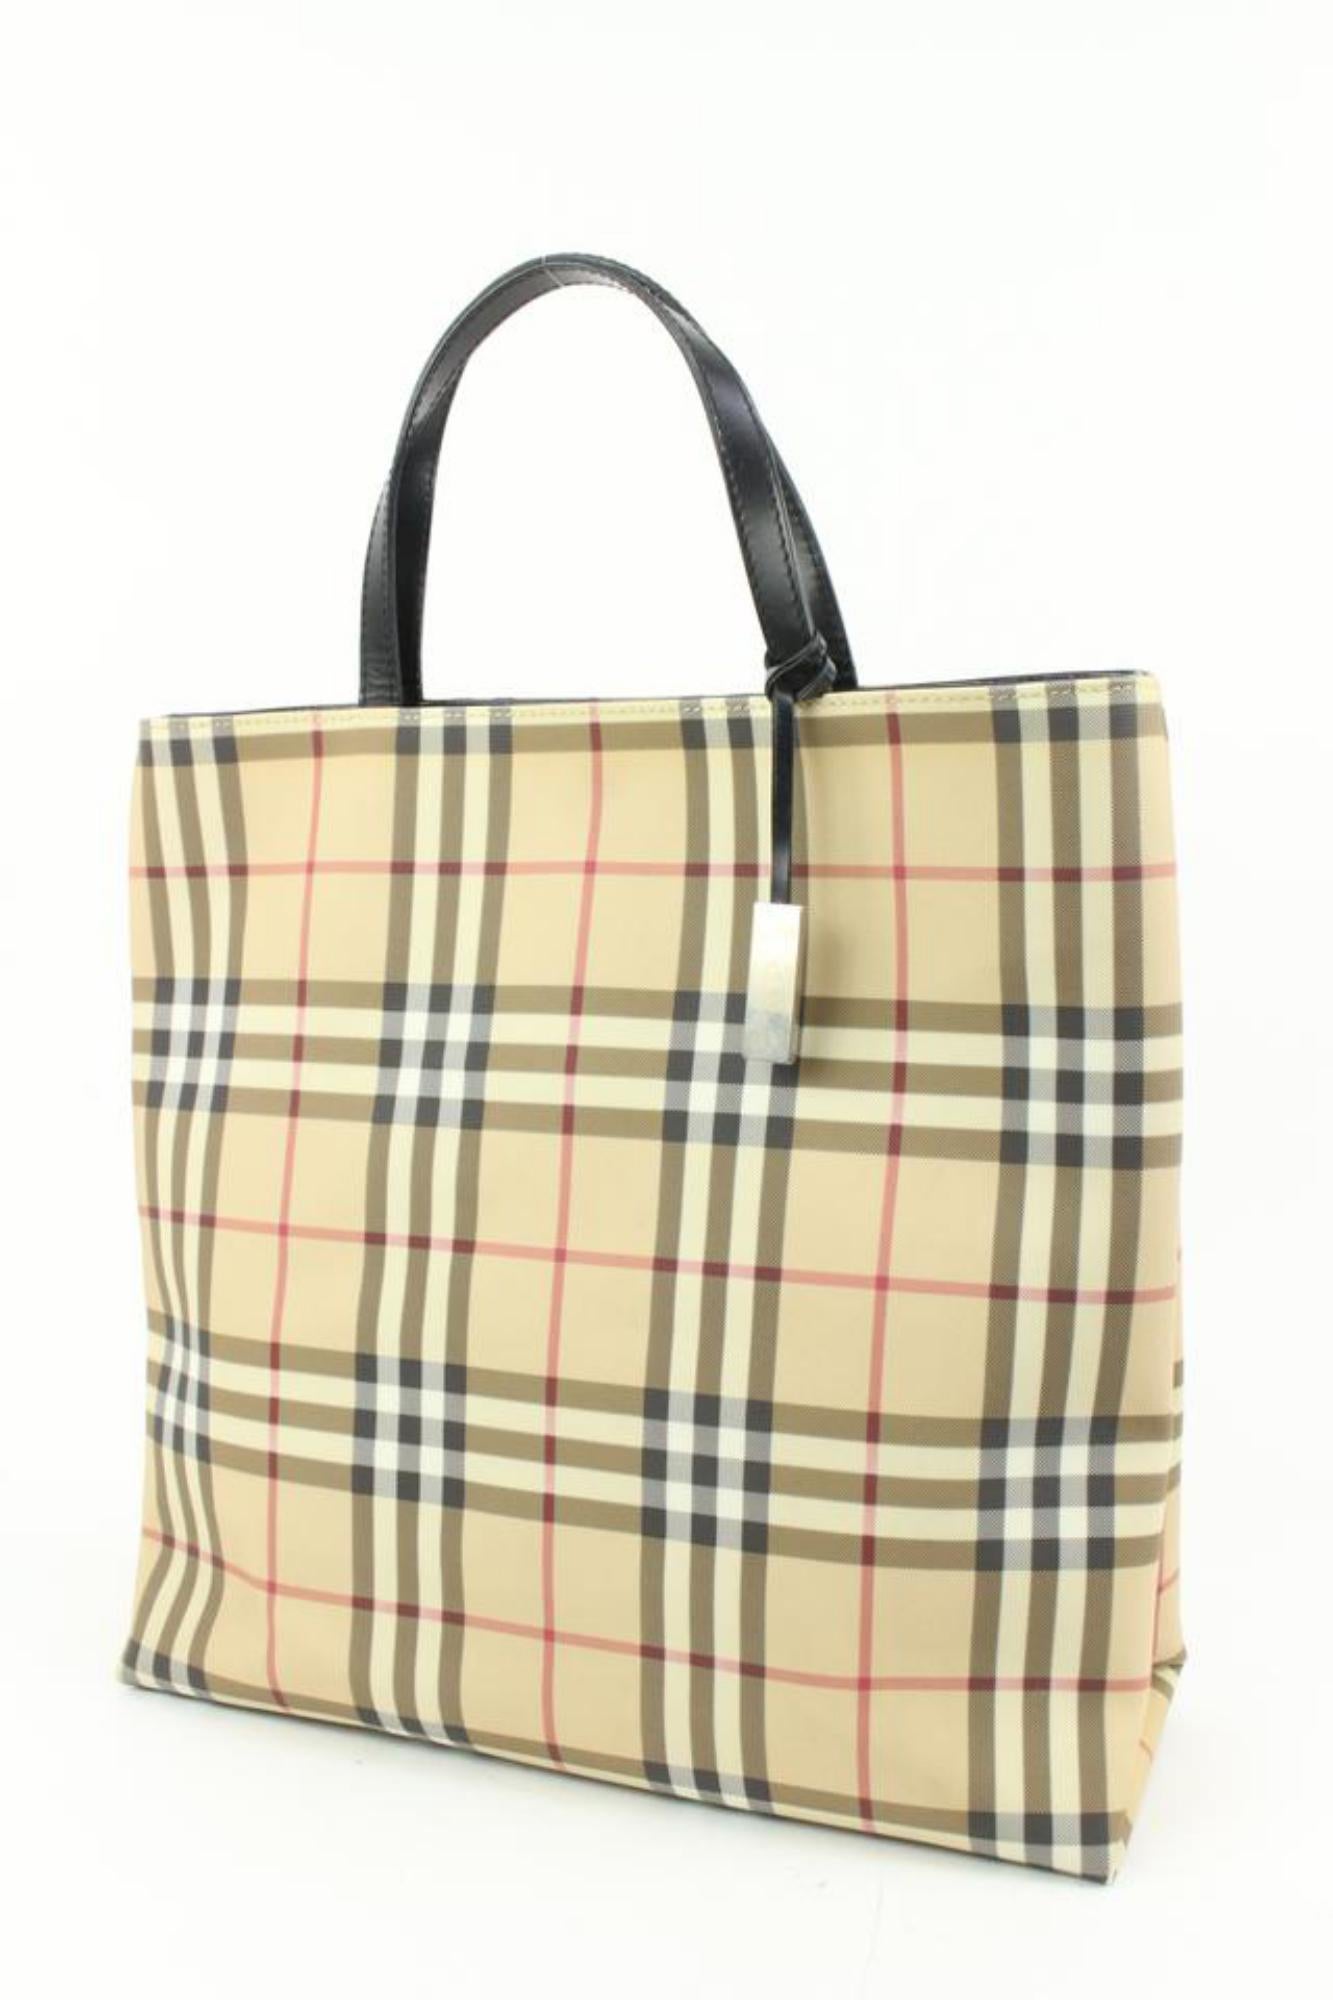 Burberry London Large Beige Nova Check Coated Canvas Shopper Tote Upcycle Ready 85b418
Date Code/Serial Number: T-02-1
Made In: Italy
Measurements: Length:  14.5